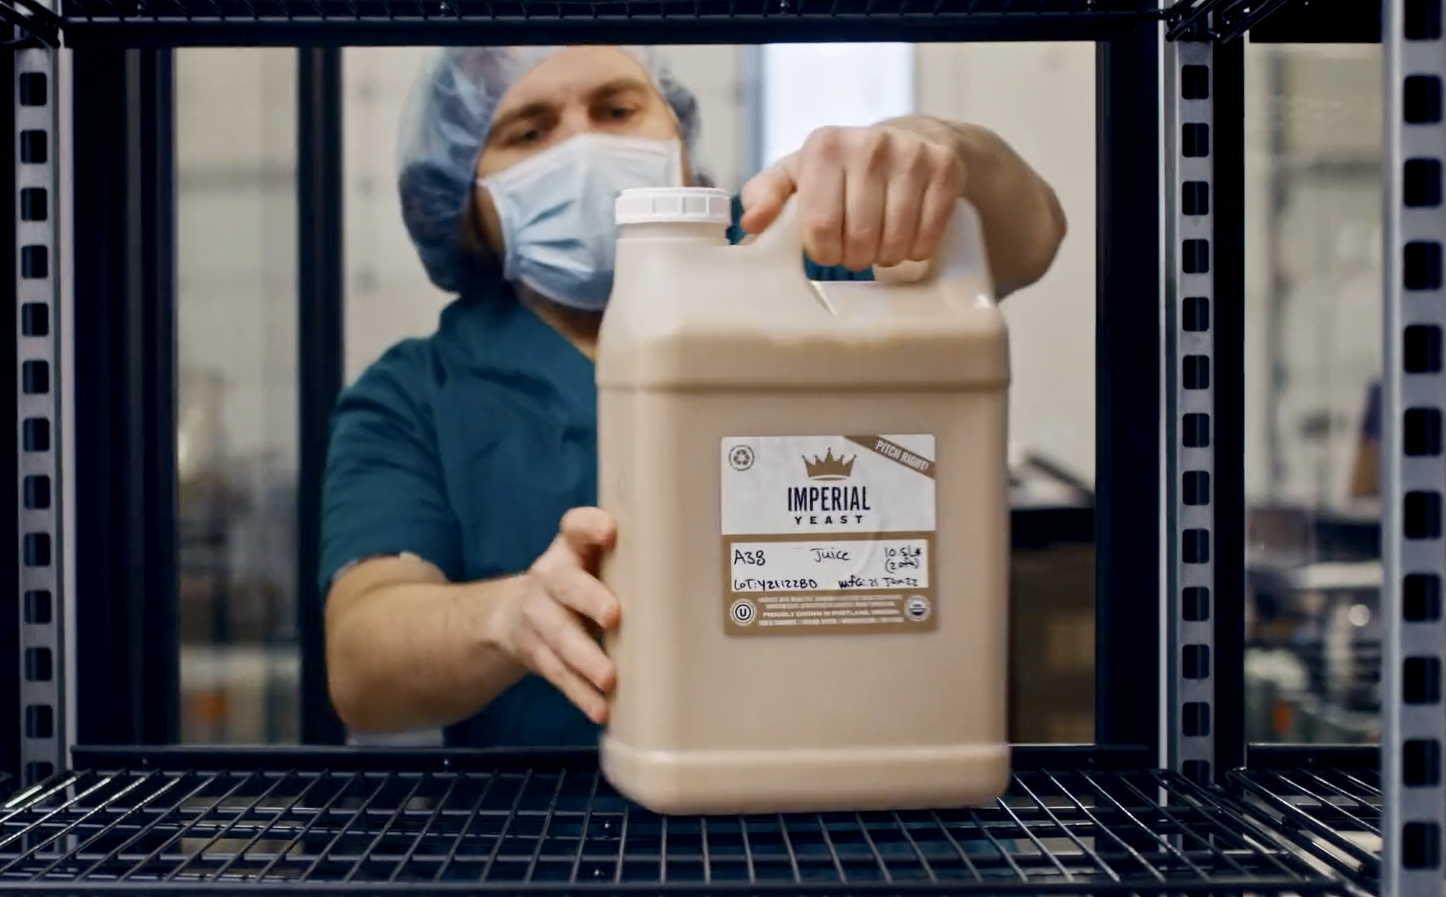 Photo from an Imperial Yeast production facility.